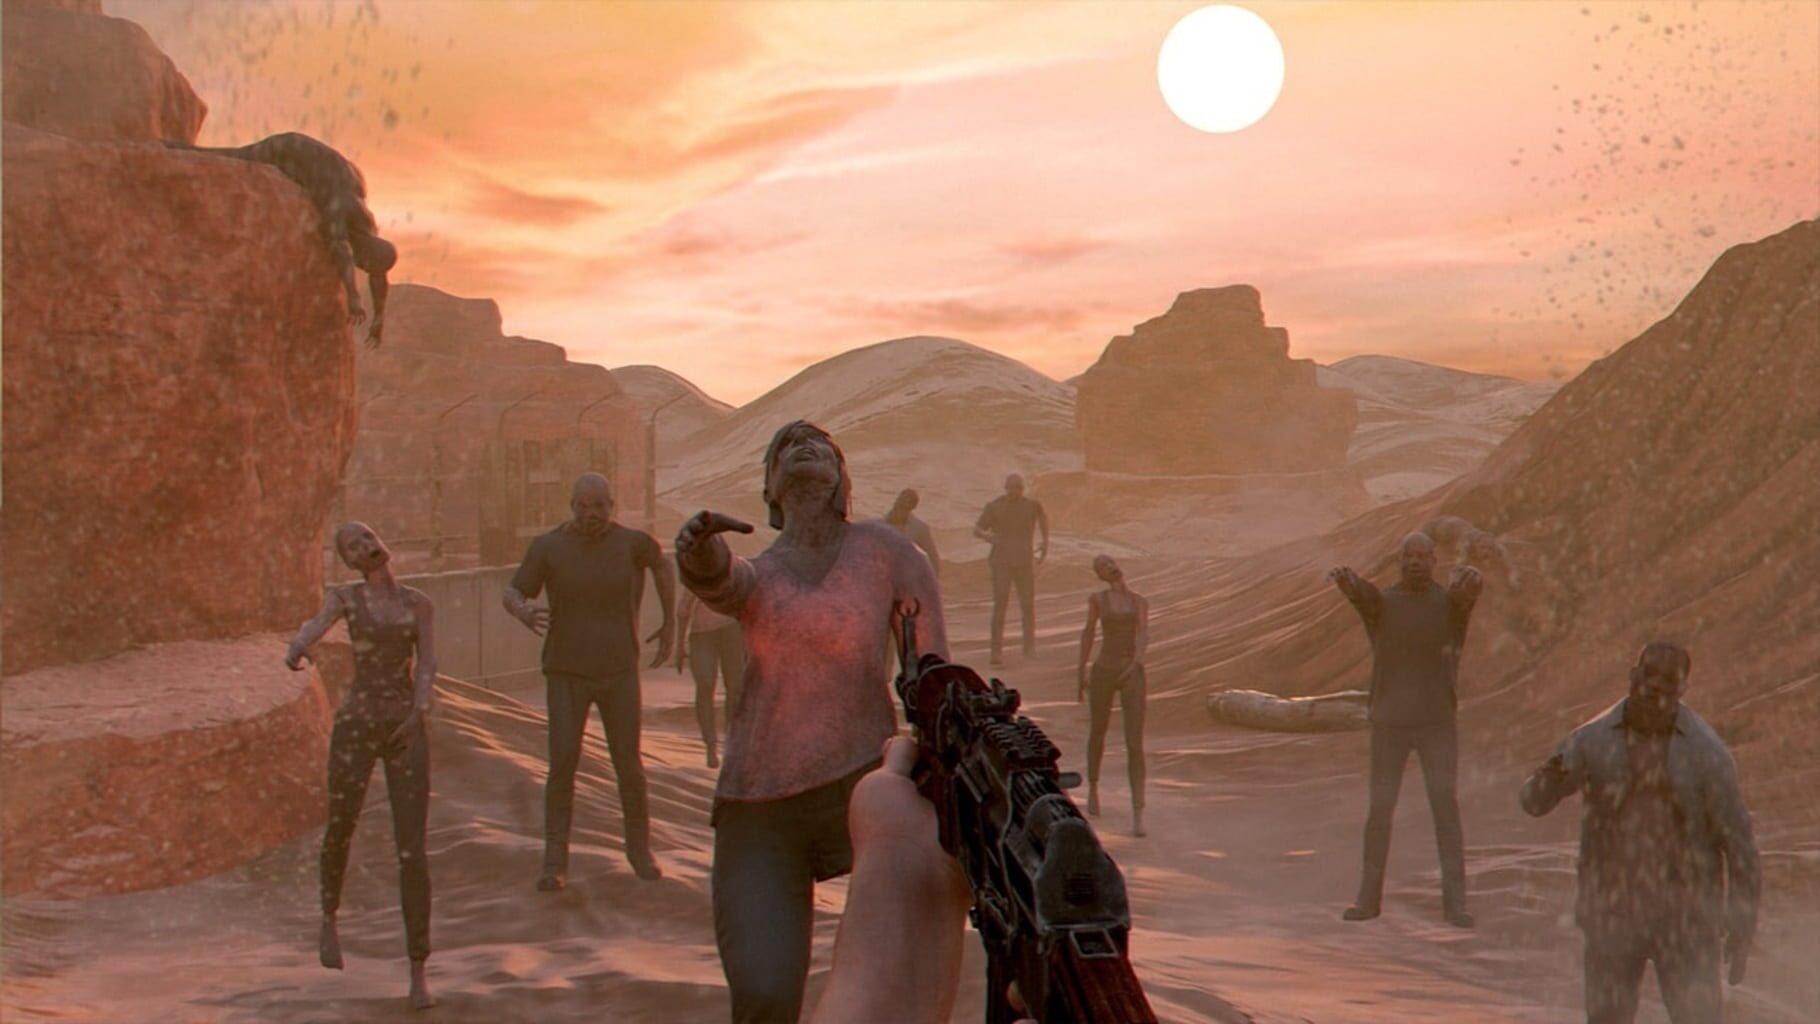 Infected run to Survive: Zombie Apocalypse Survival Story Shooter Dead Cry screenshot